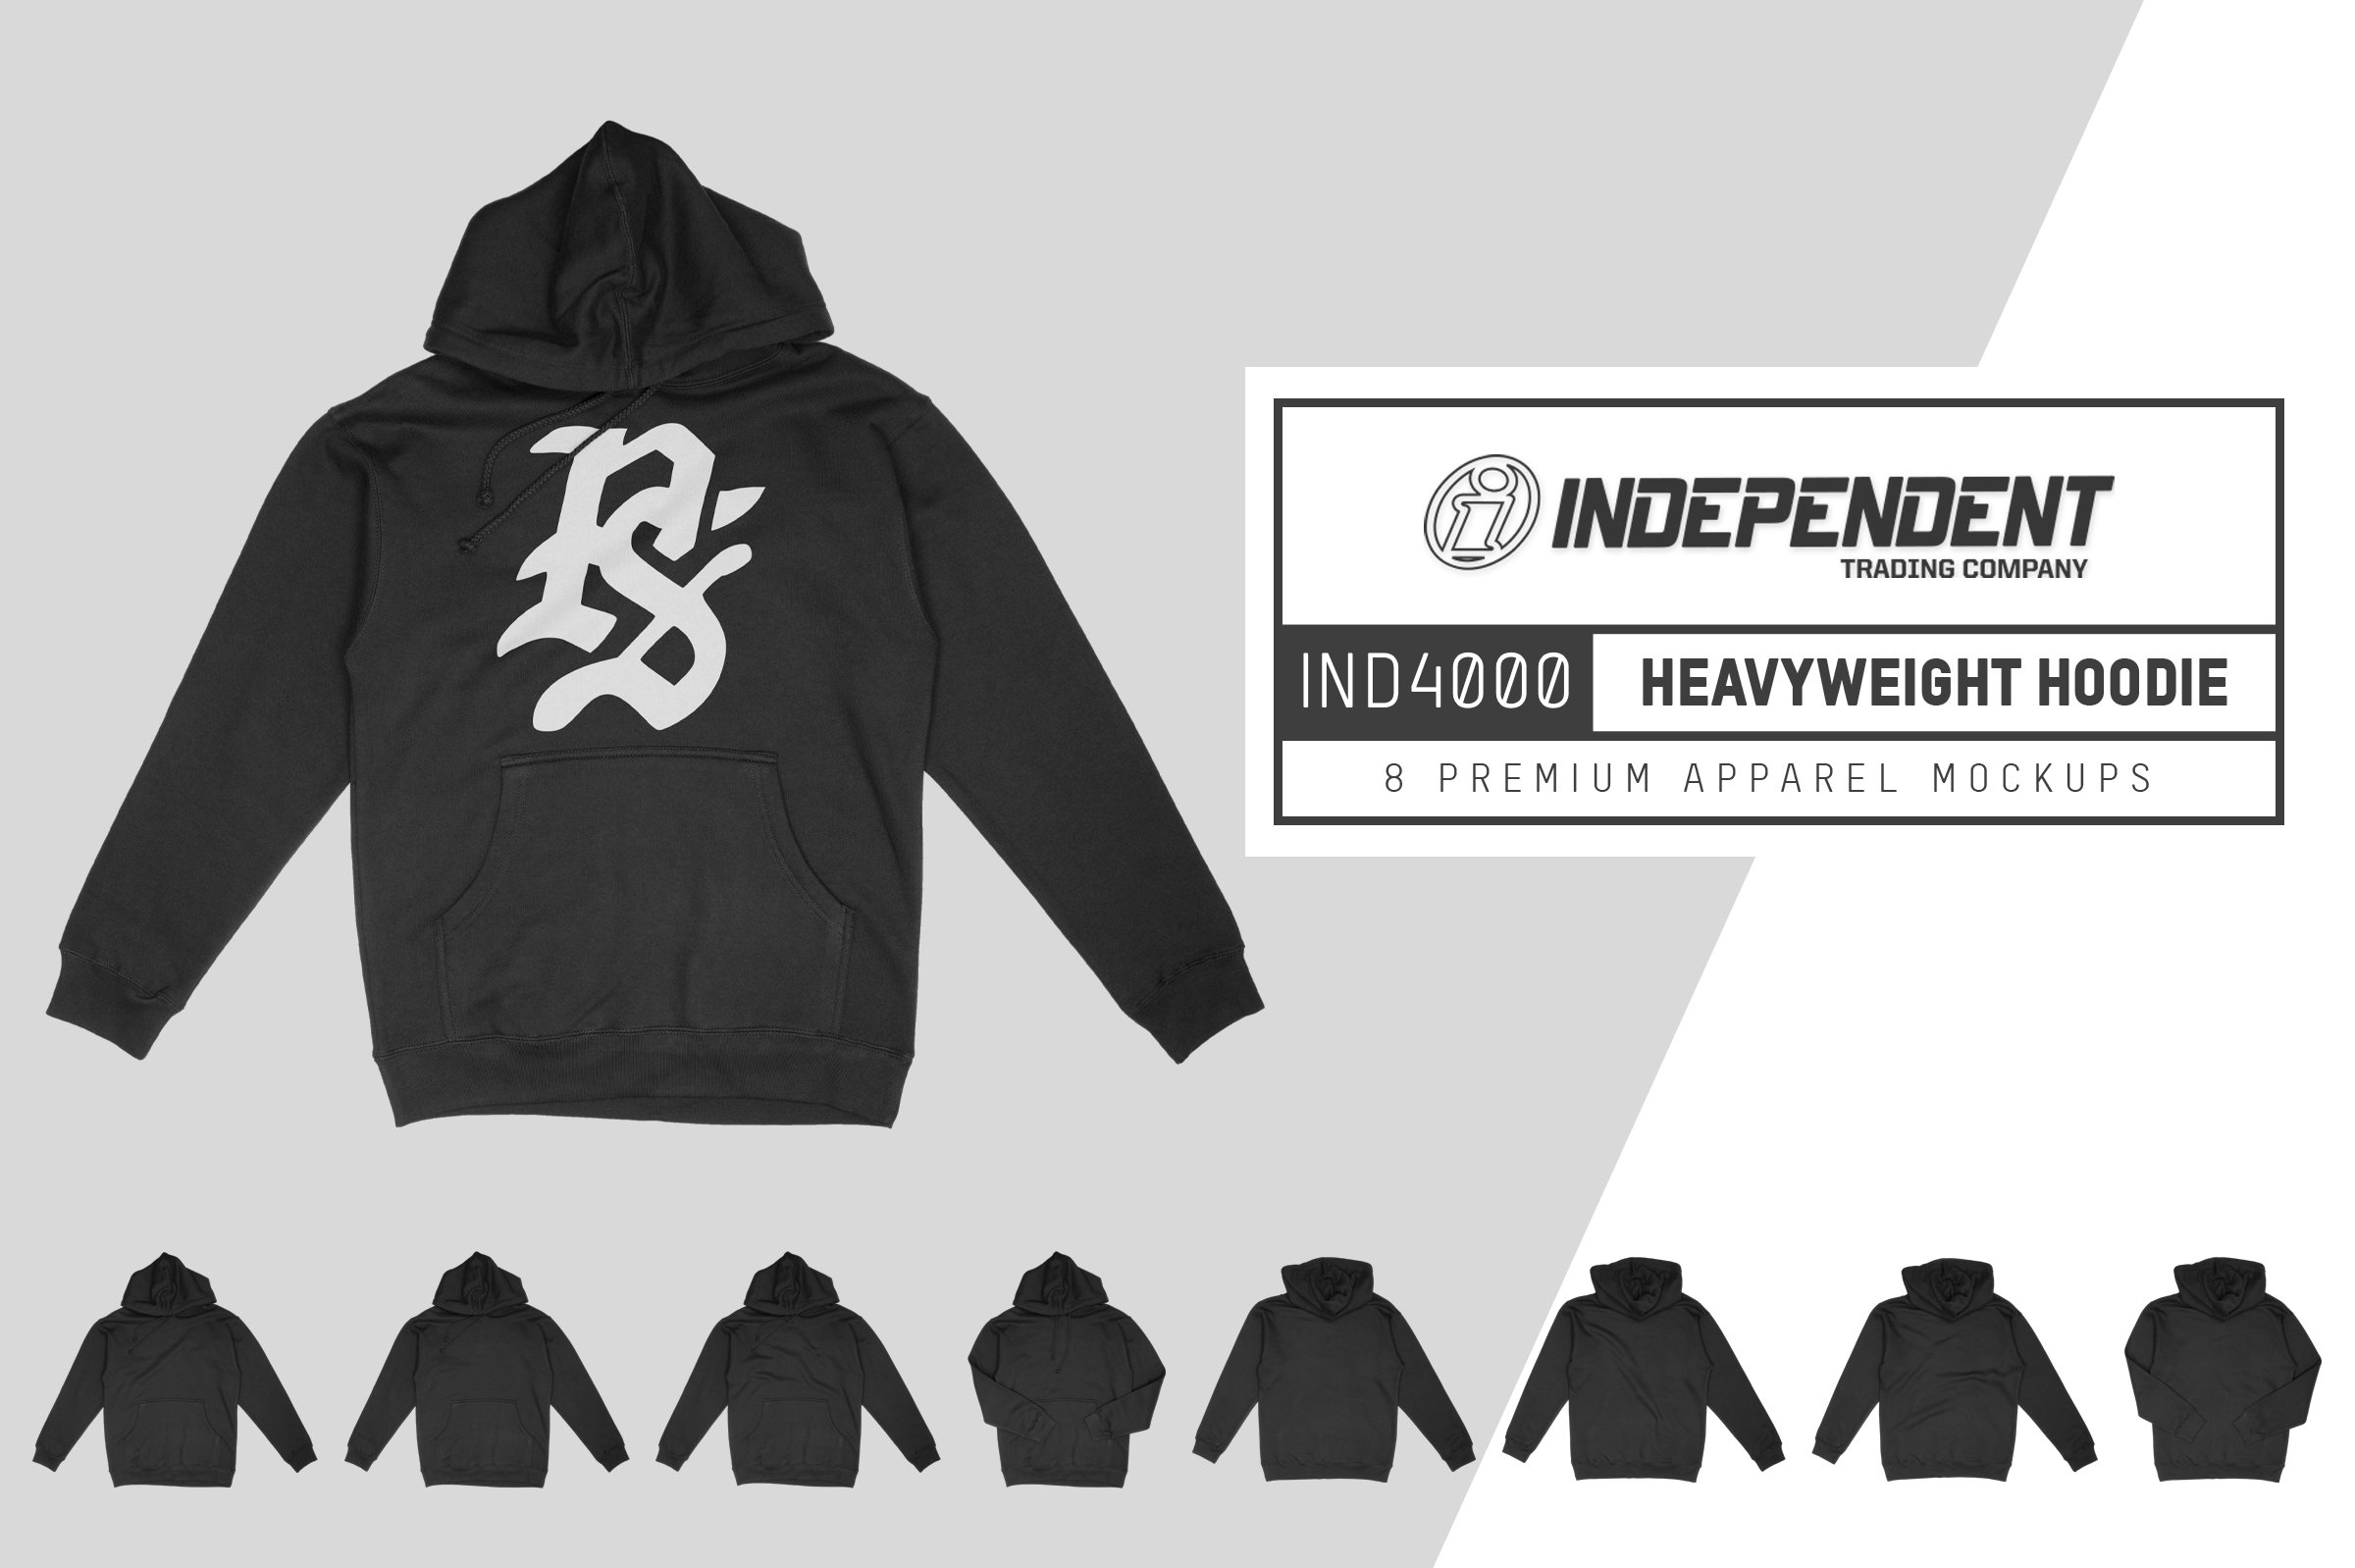 Independent 4000 Heavyweight Hoodie cover image.